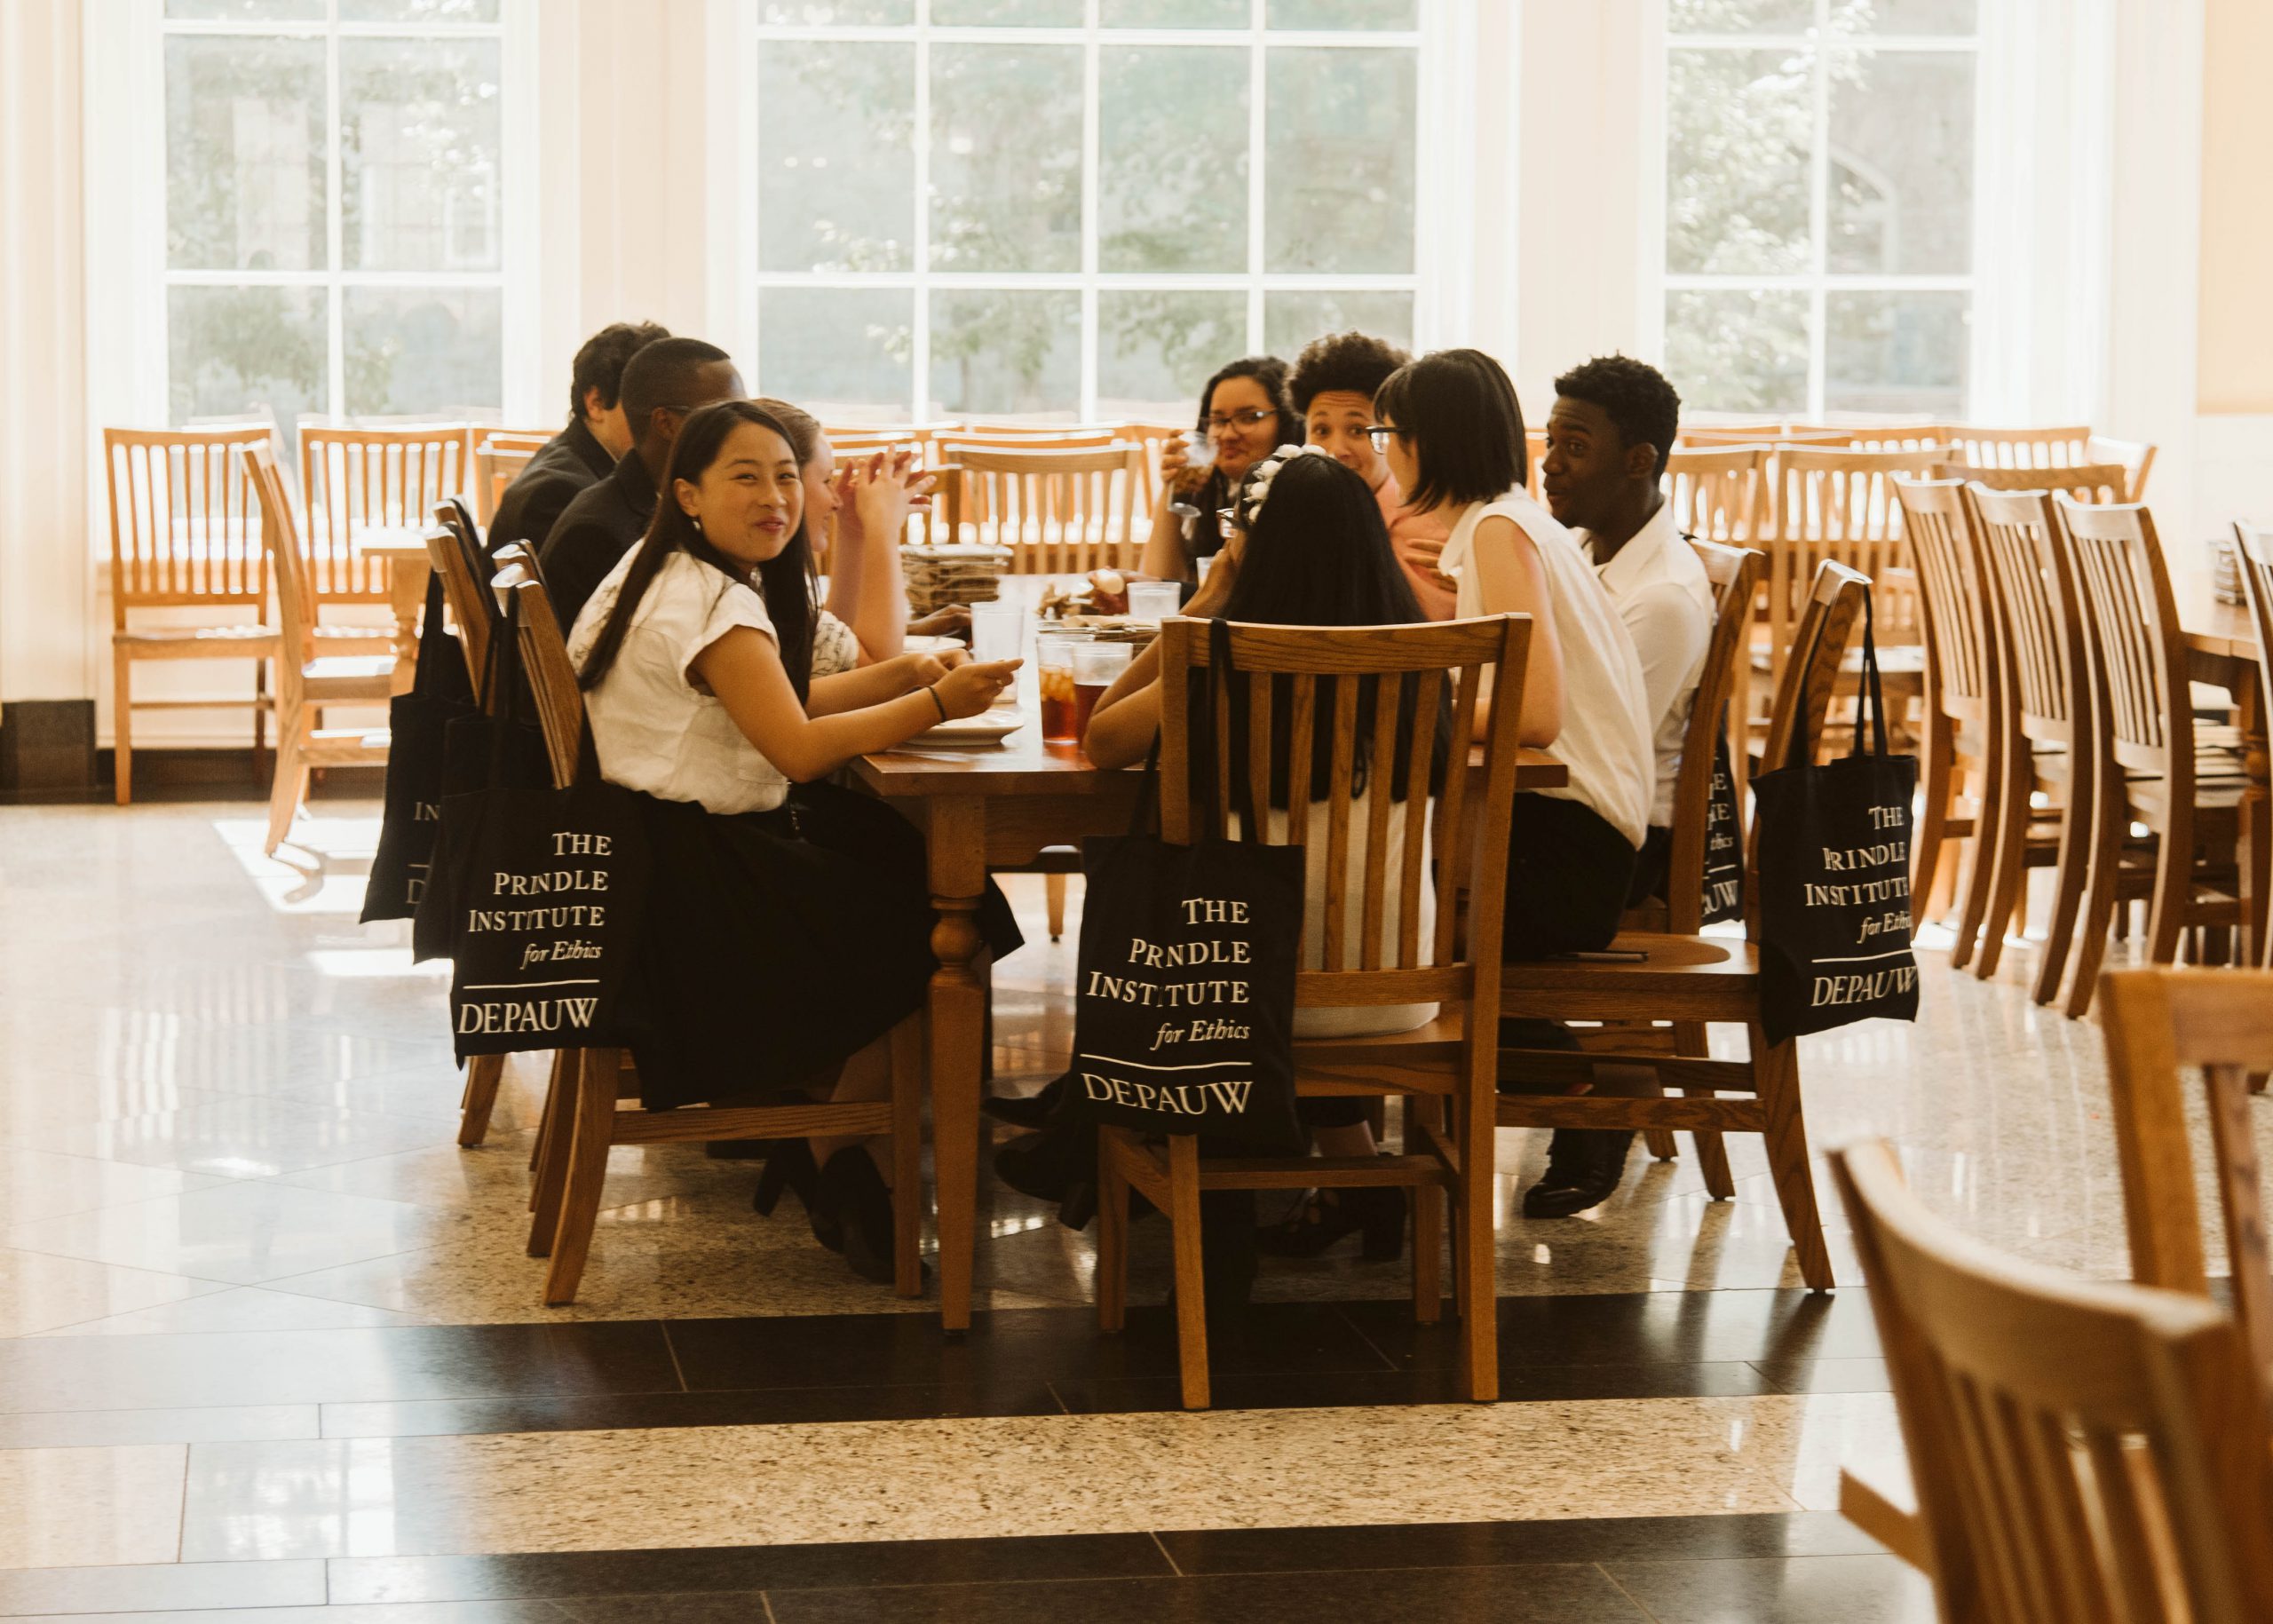 A group of high school students seated around a table in a large dining hall. One student is looking at the camera and smiling.